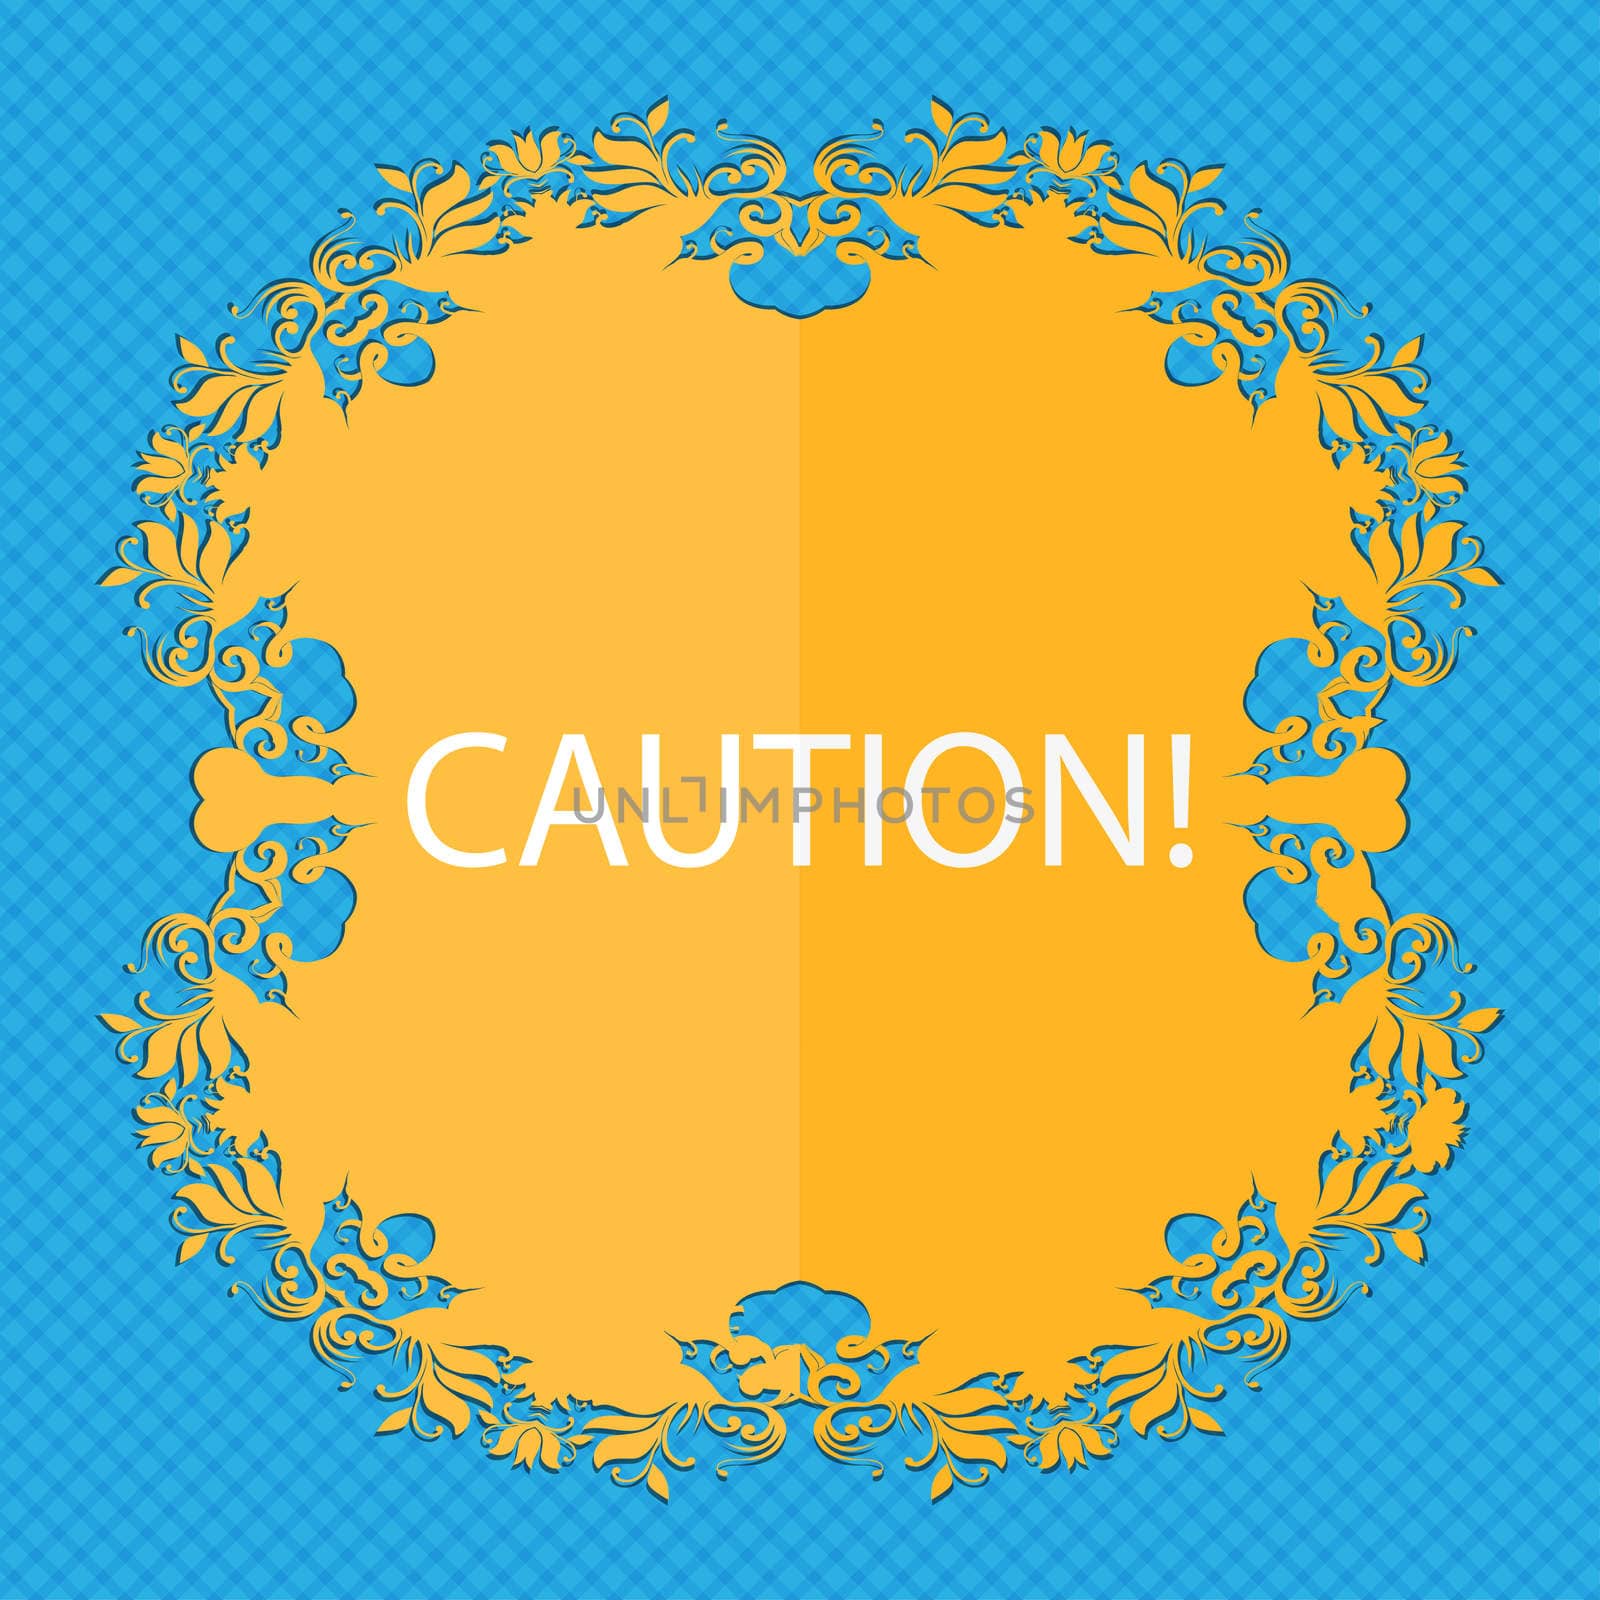 Attention caution sign icon. Exclamation mark. Hazard warning symbol. Floral flat design on a blue abstract background with place for your text.  by serhii_lohvyniuk